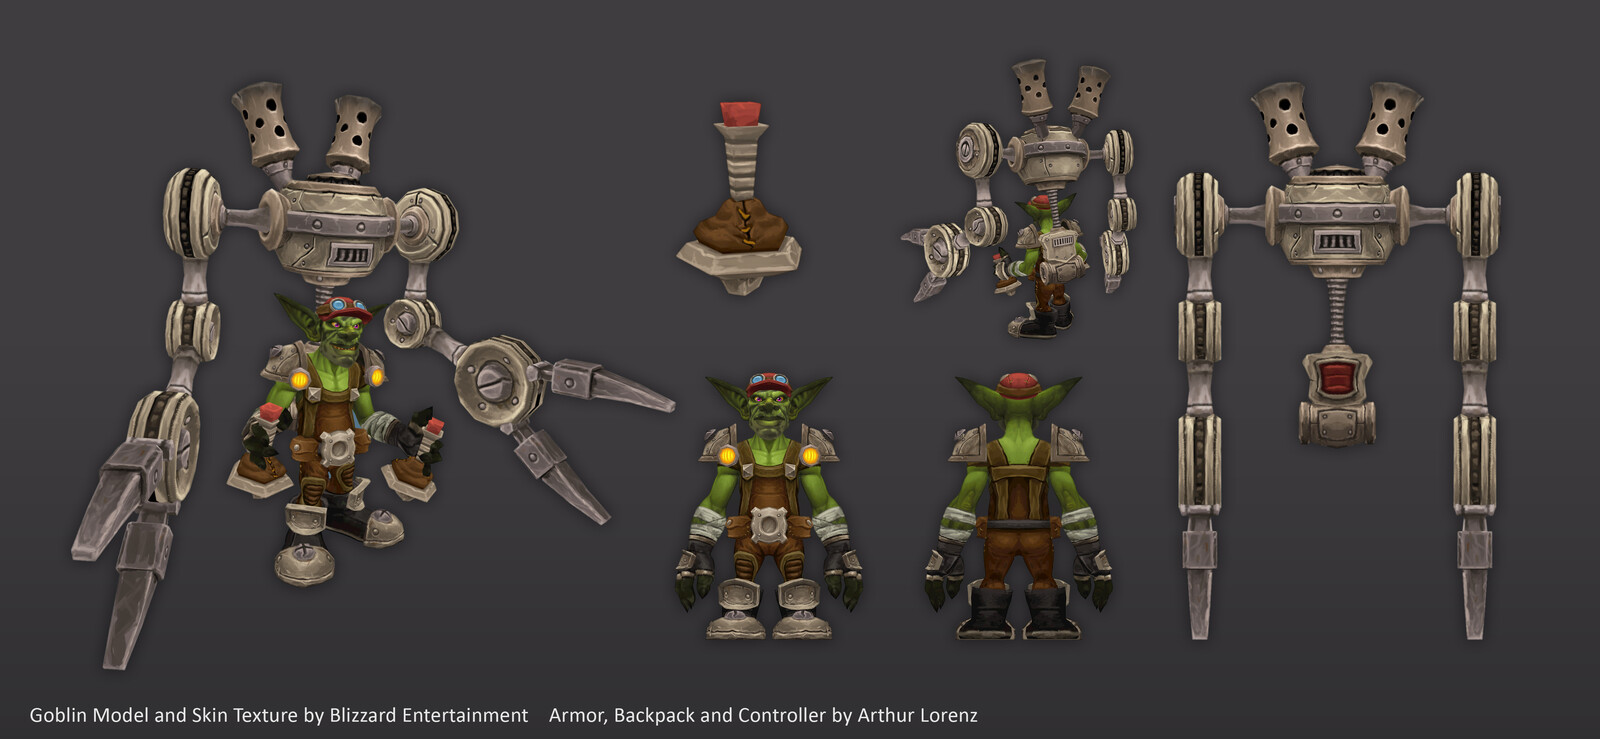 Tinker Model | Goblin Model and Skin Texture by Blizzard Entertainment, Armor Texture, Armor, Controller and Backpack Models by me